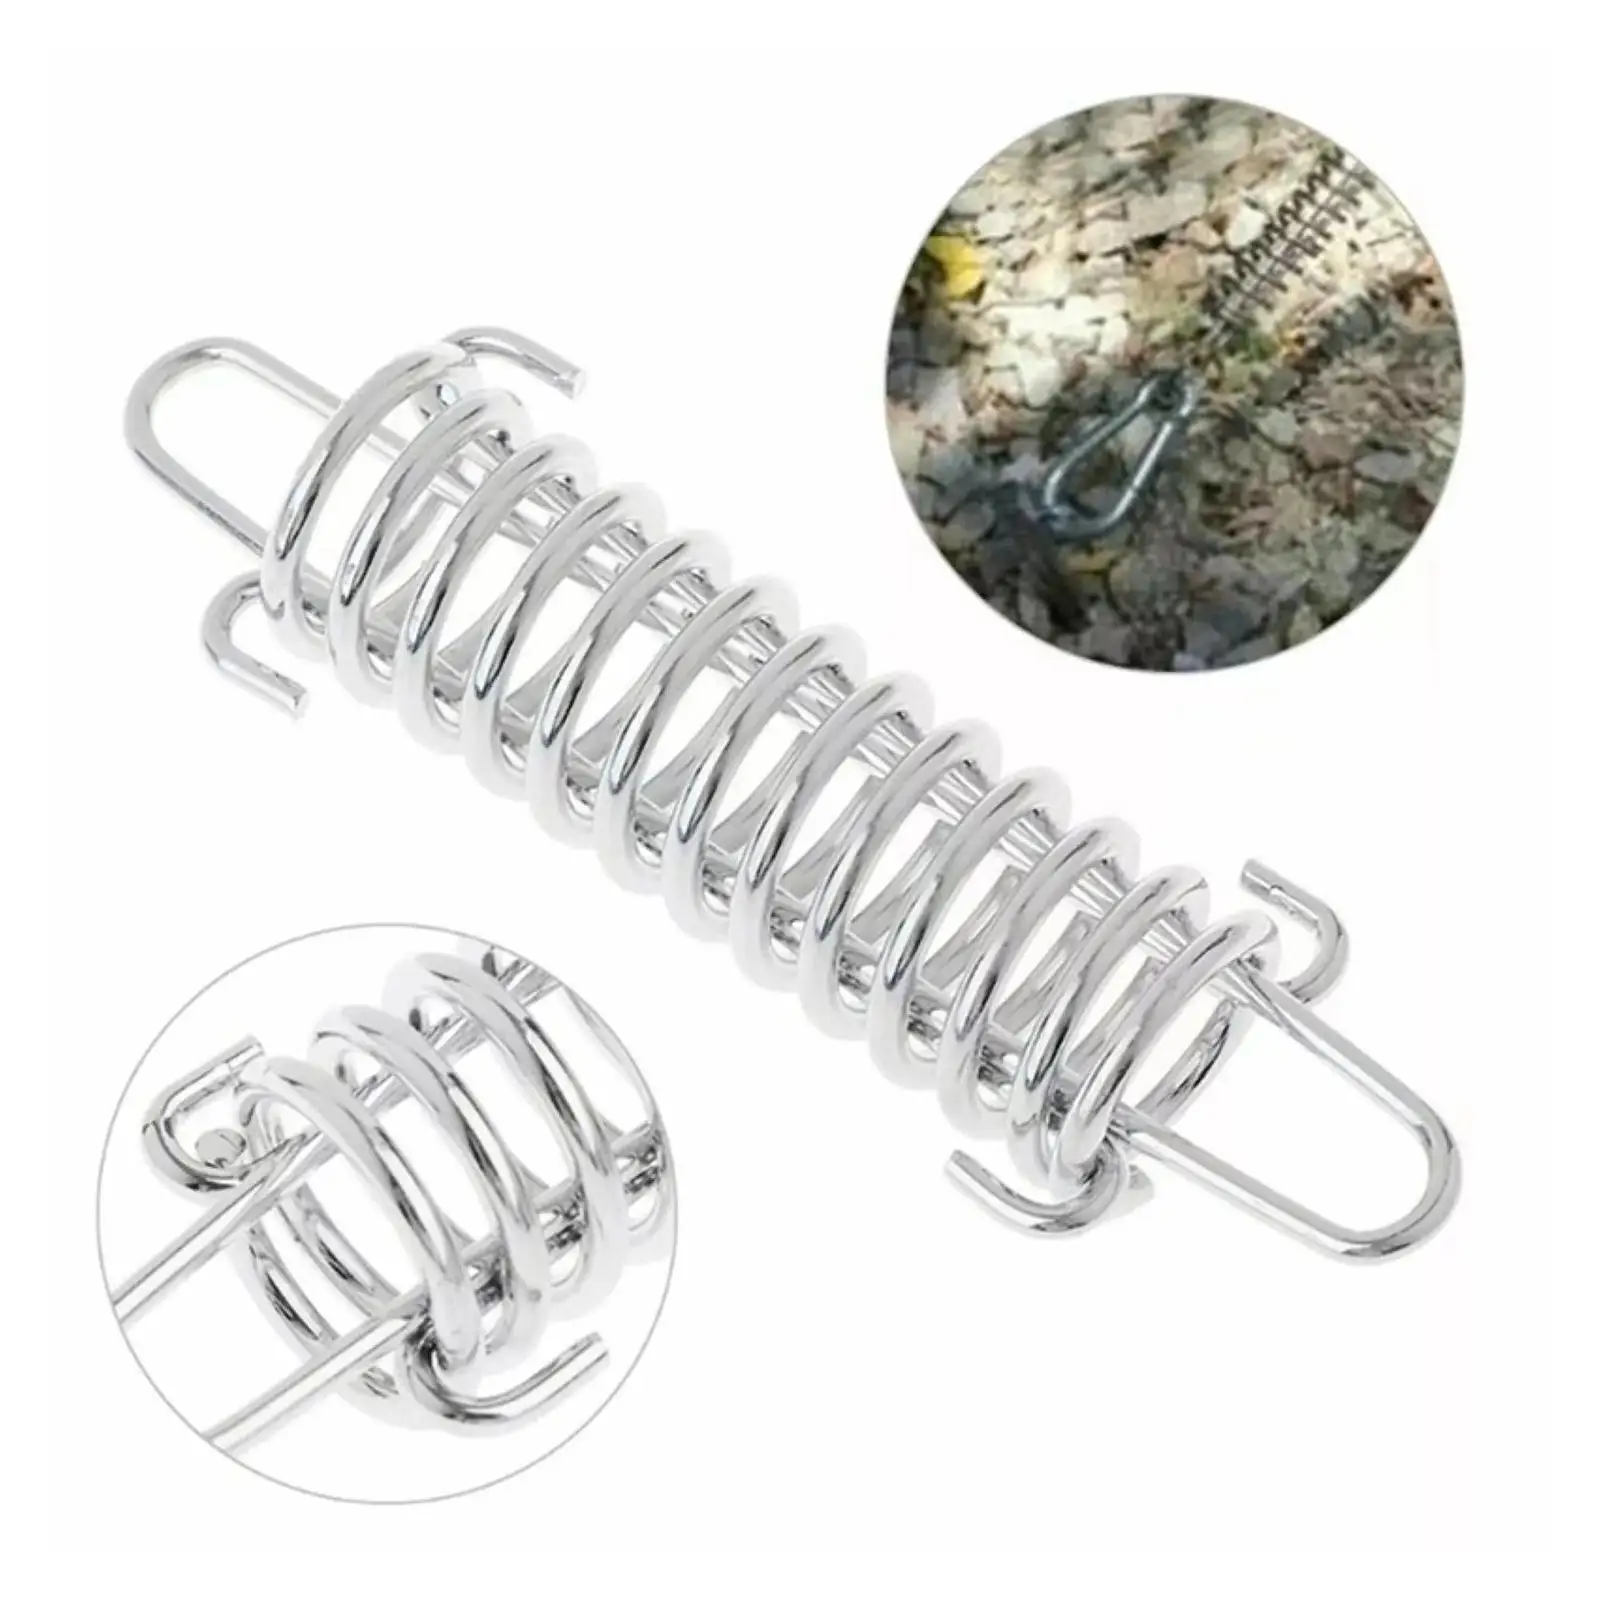 Awning Tie Down Set with Adjustable Band Universal Awning Clips for travel Camping Rail Track Tie Down Eyelet